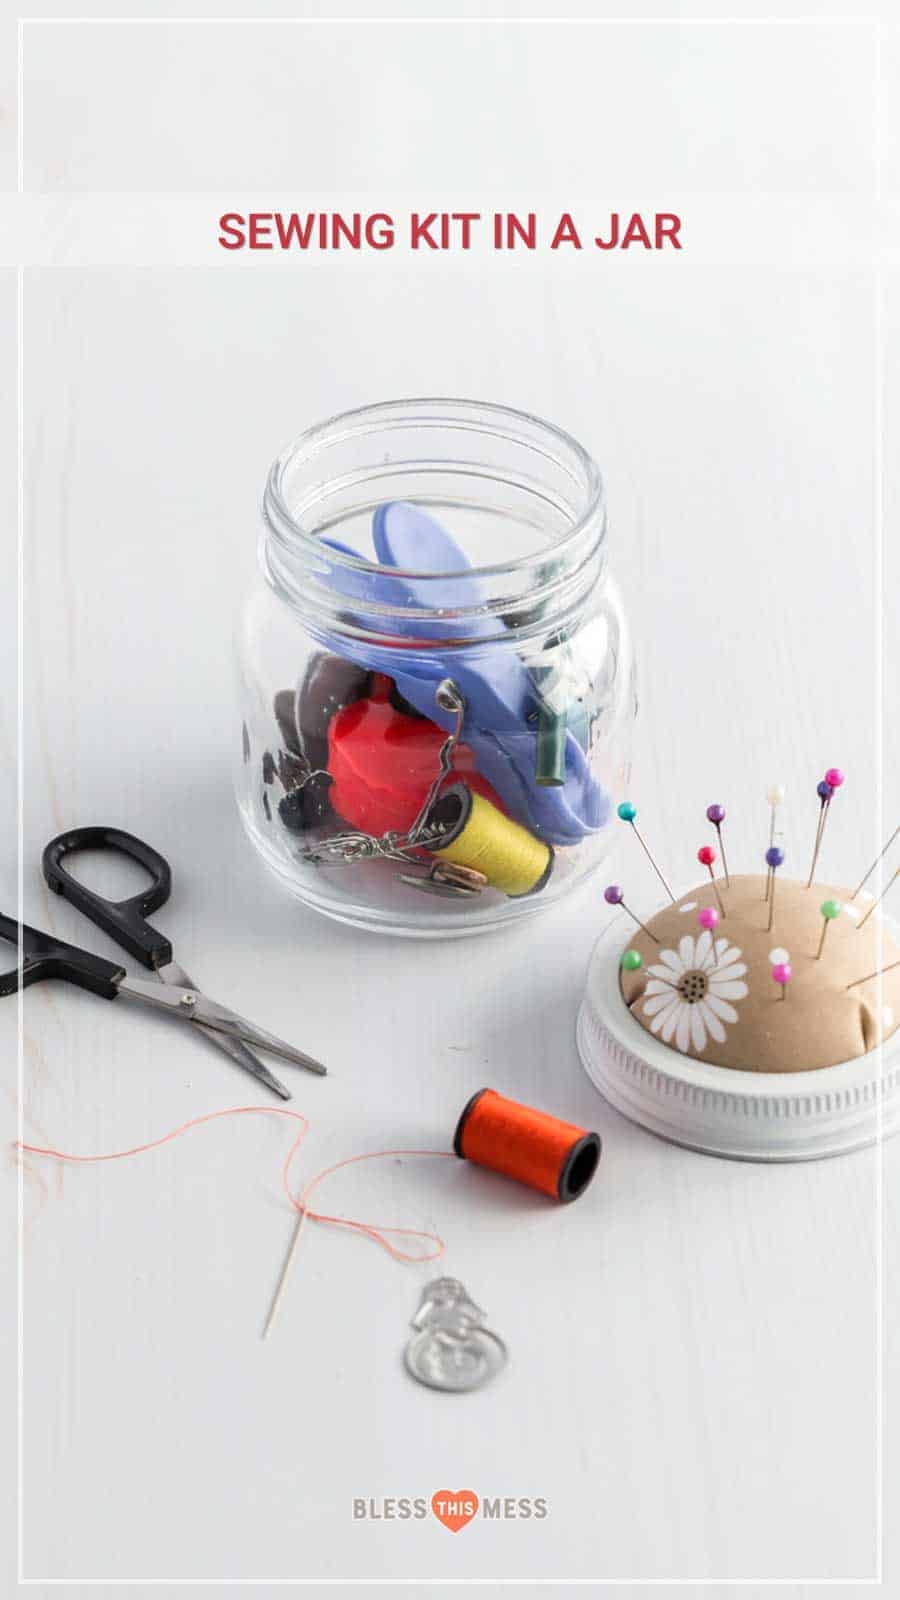 This DIY sewing kit in a jar is such a fun, creative, simple, and sweet gift for the crafty ones in your life! You can quickly make a few for the odds and ends of your holiday gifting list -- give them as host gifts, to teachers, or to anyone else you know who loves a fun craft project! #diy #sewingkit #diysewingkit #homemadesewingkit #sewkit #DIYchristmasgift